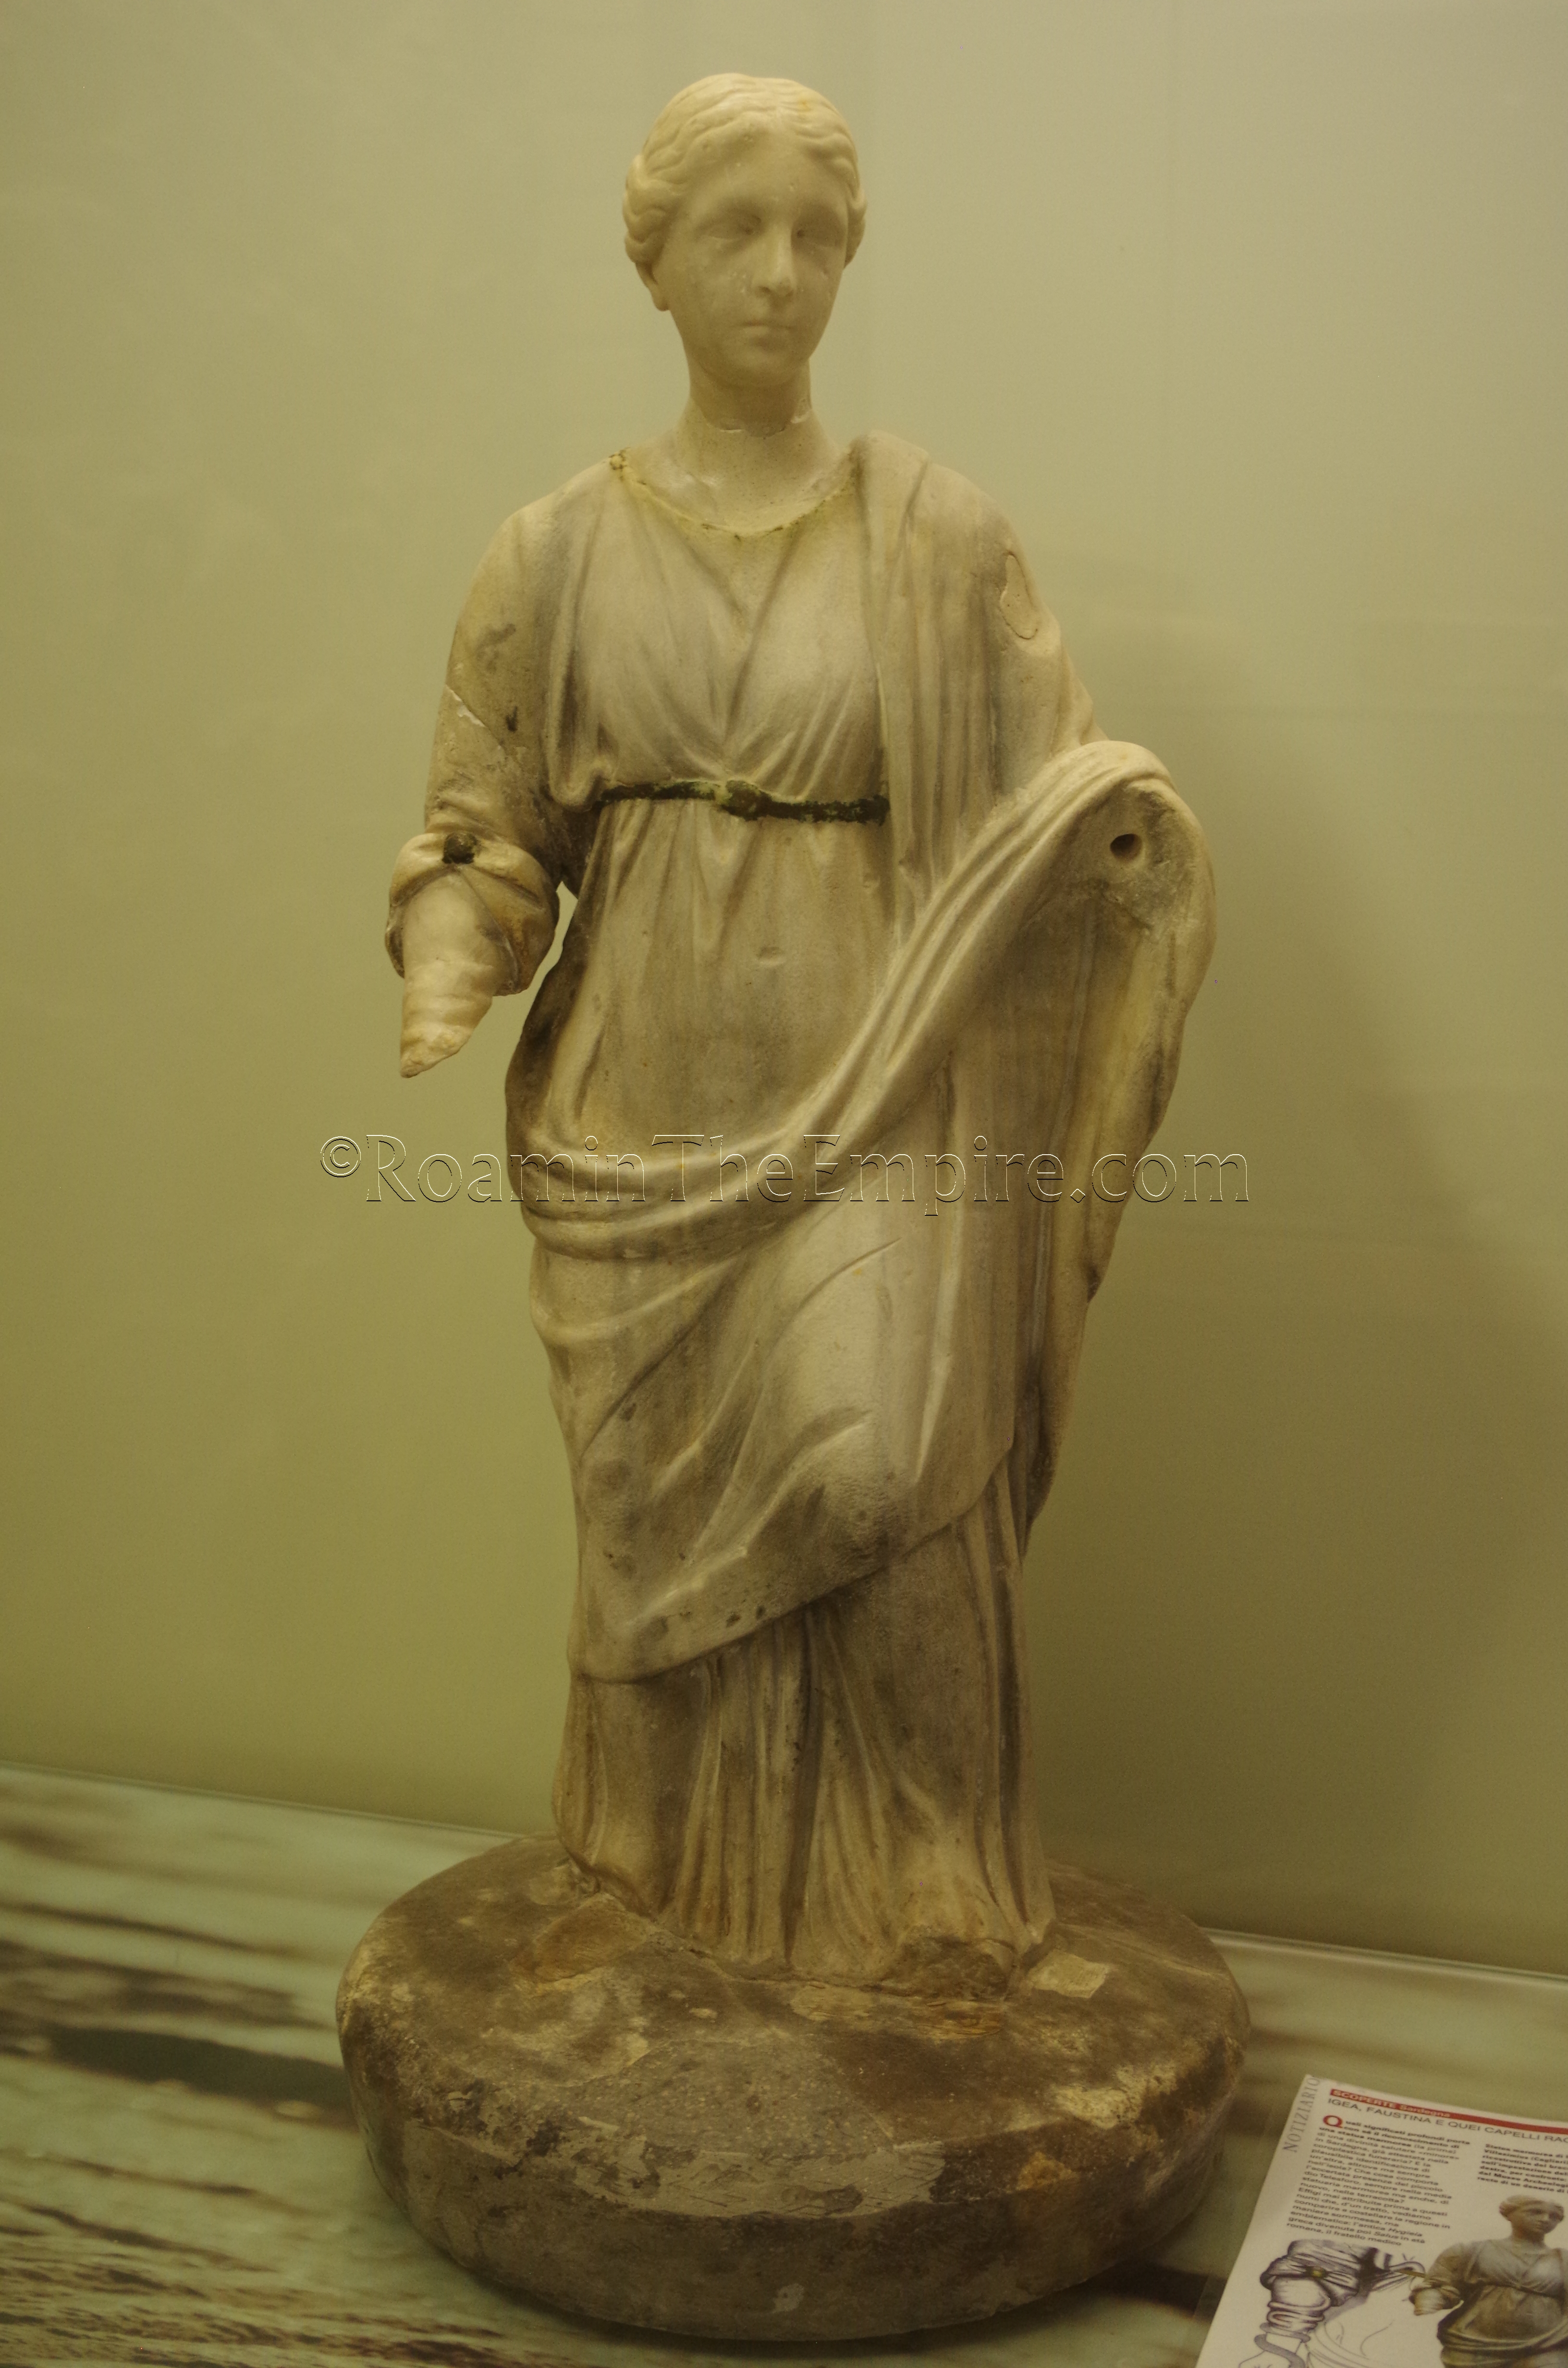 Statue of Hygeia in the Museo Archeologico.